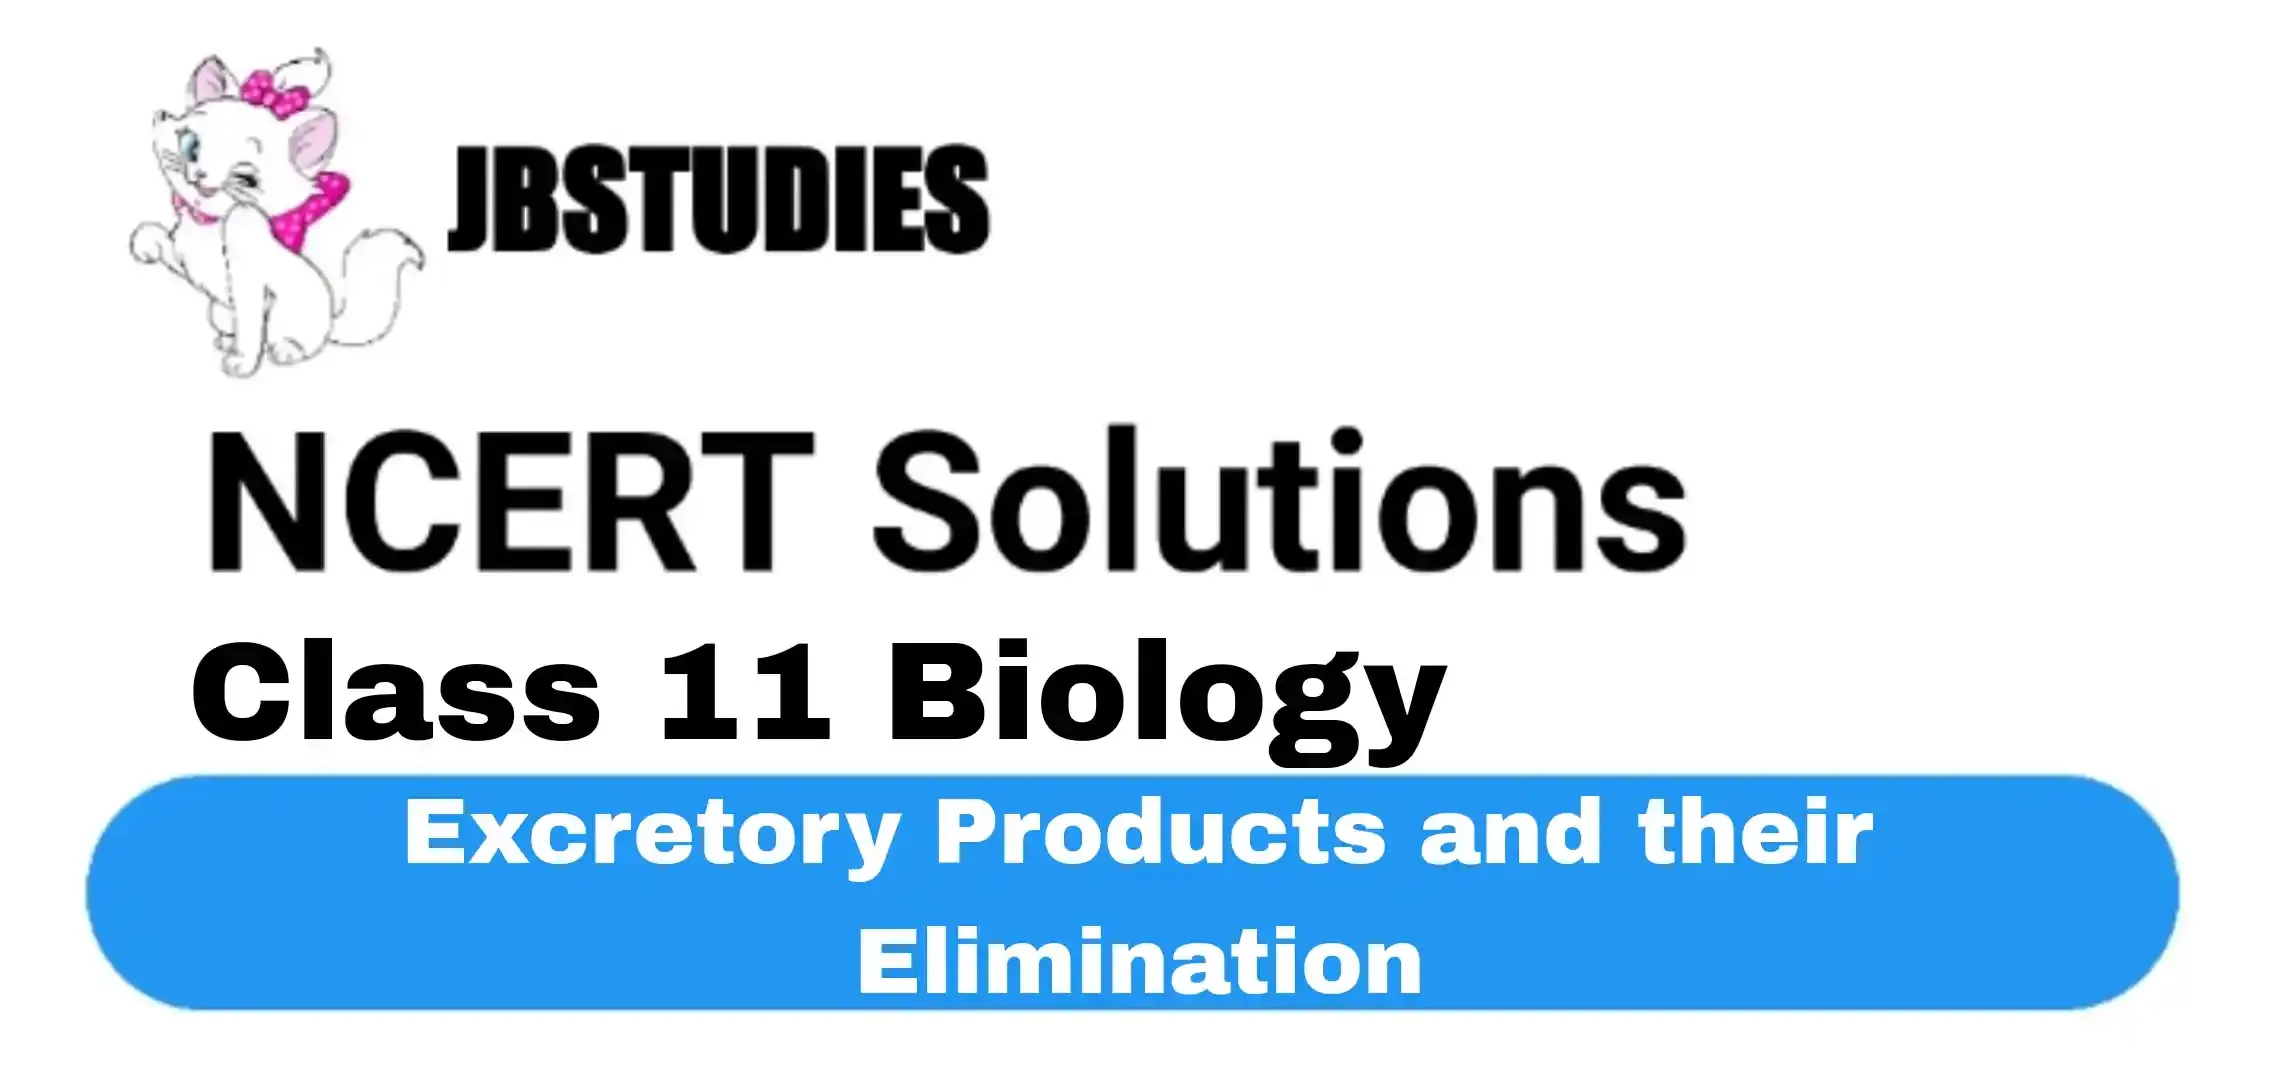 Solutions Class 11 Biology Chapter -19 (Excretory Products and their Elimination)